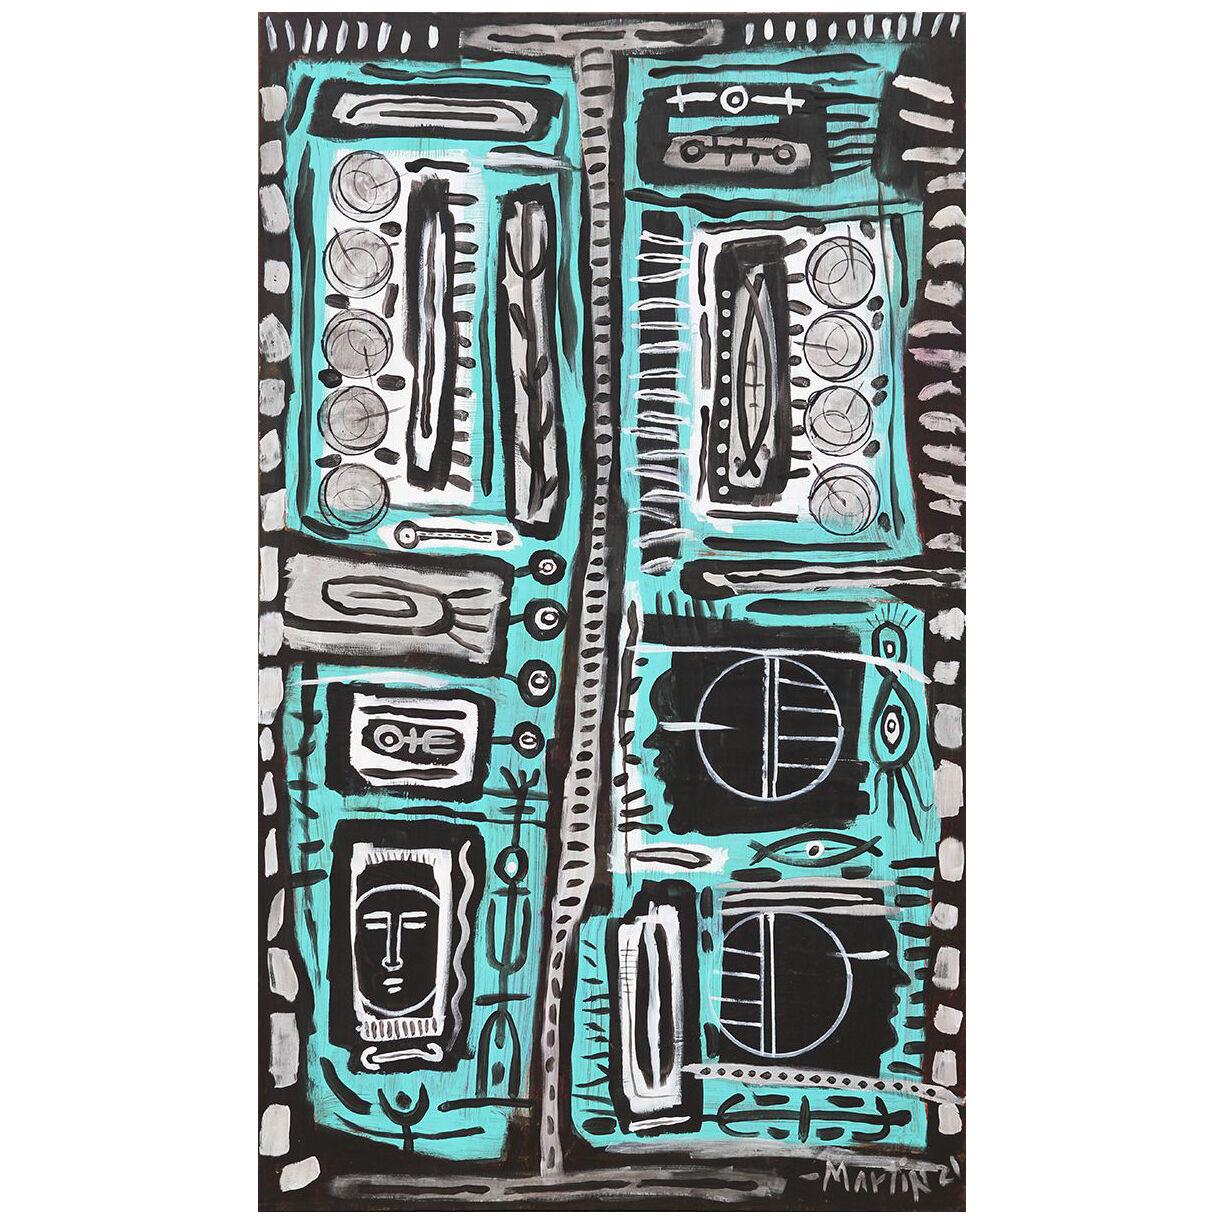 Teal, Black, and Grey Toned Abstract Painting by Larry Martin